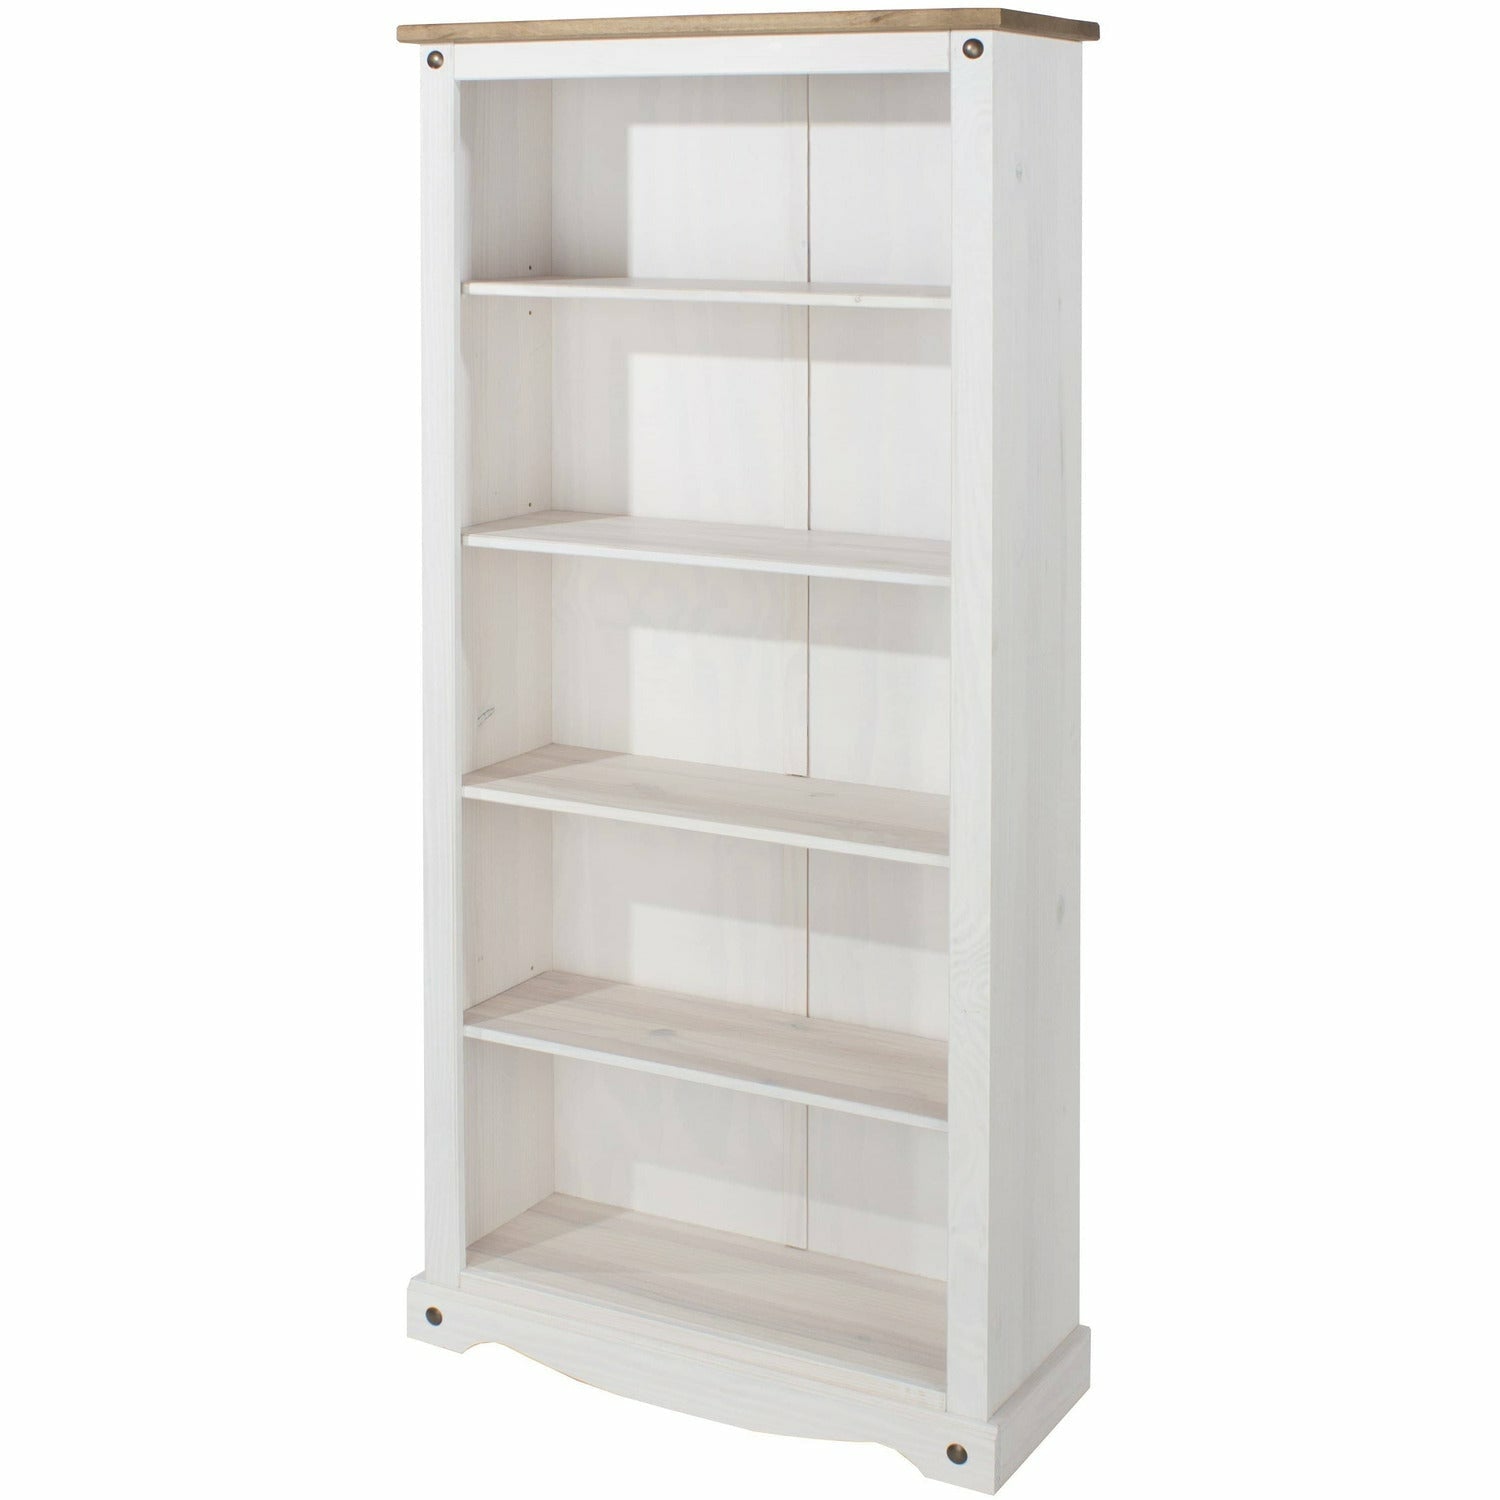 Corona White Tall Bookcase With 4 Open Shelves